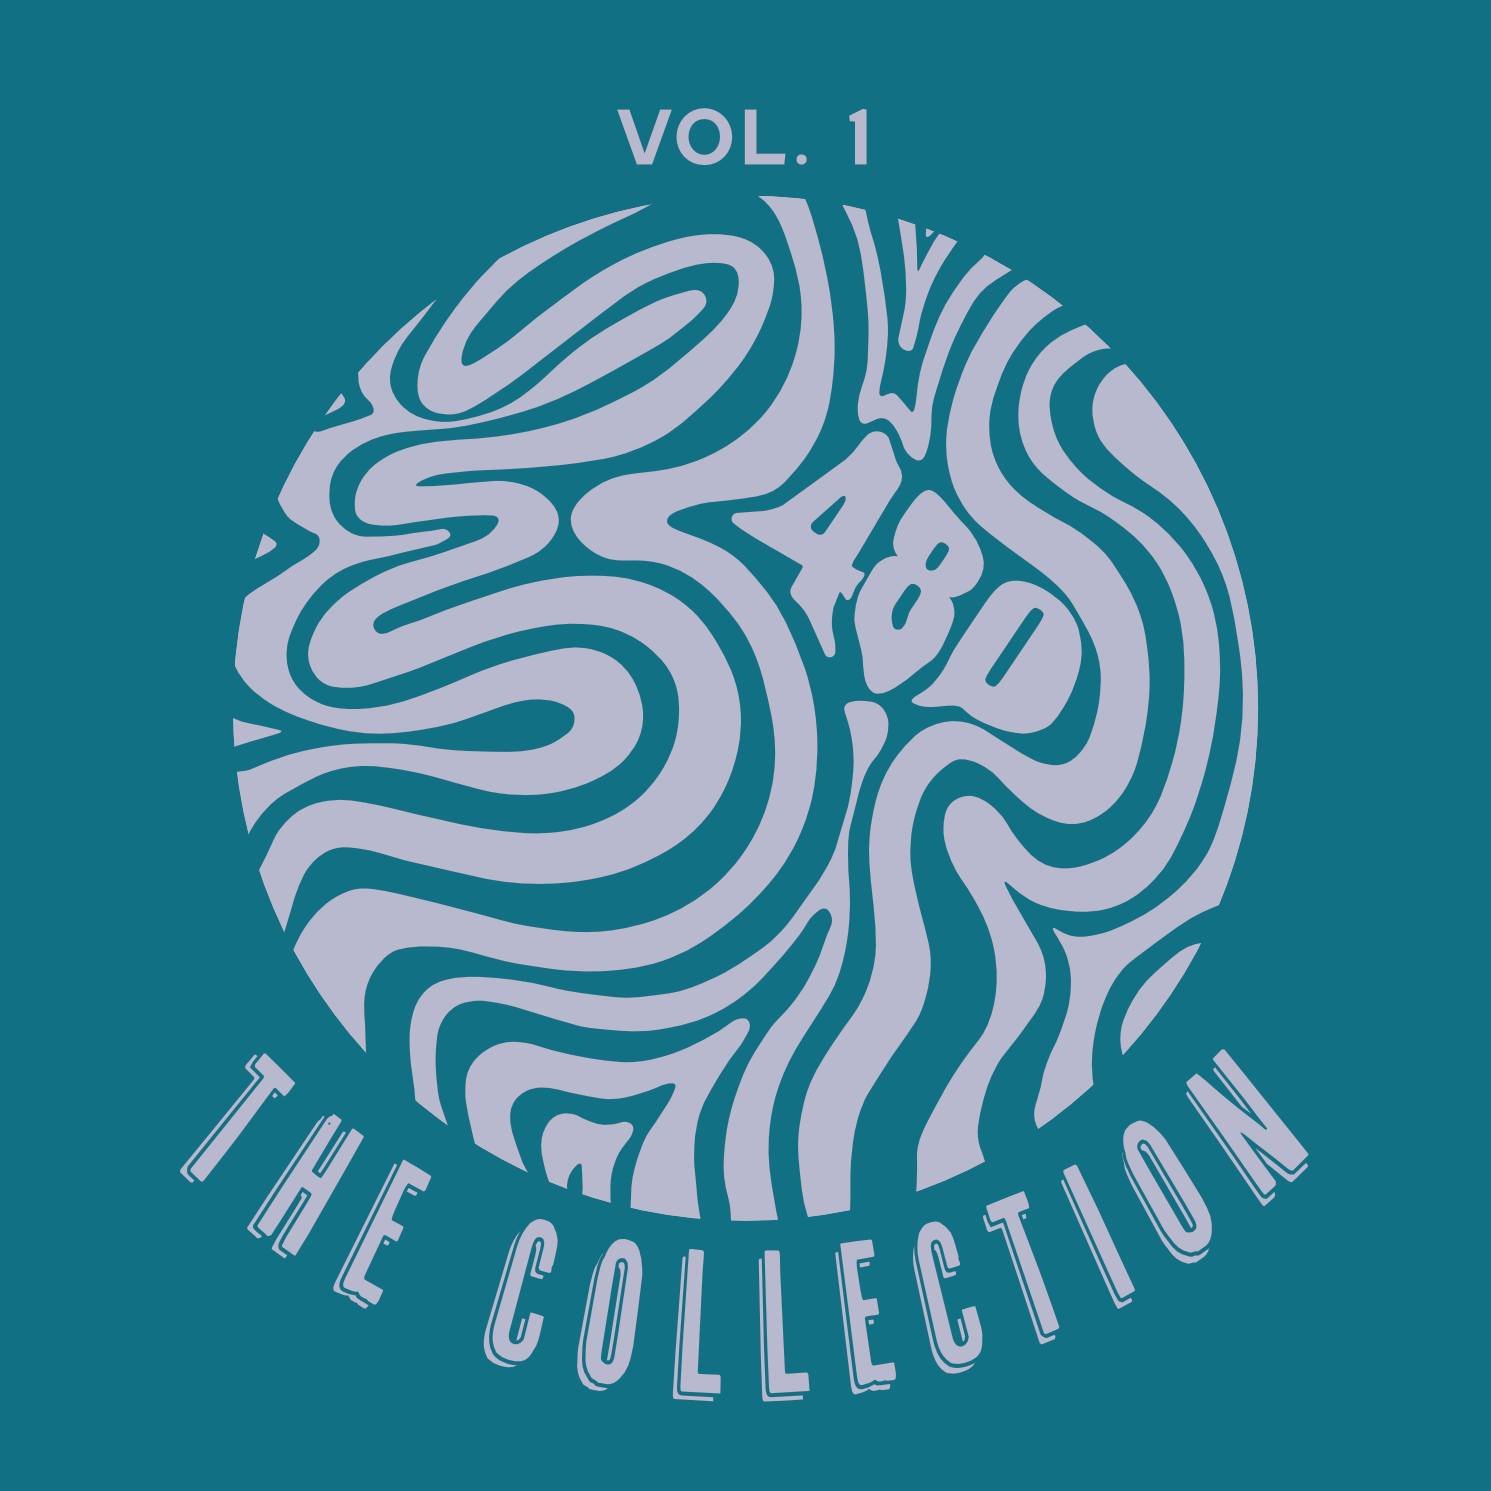 The Collection - Vol. 1. OUT NOW ON ALL STREAMING PLATFORMS! 💜
-
 #music #recordlabel #480collective #twincities